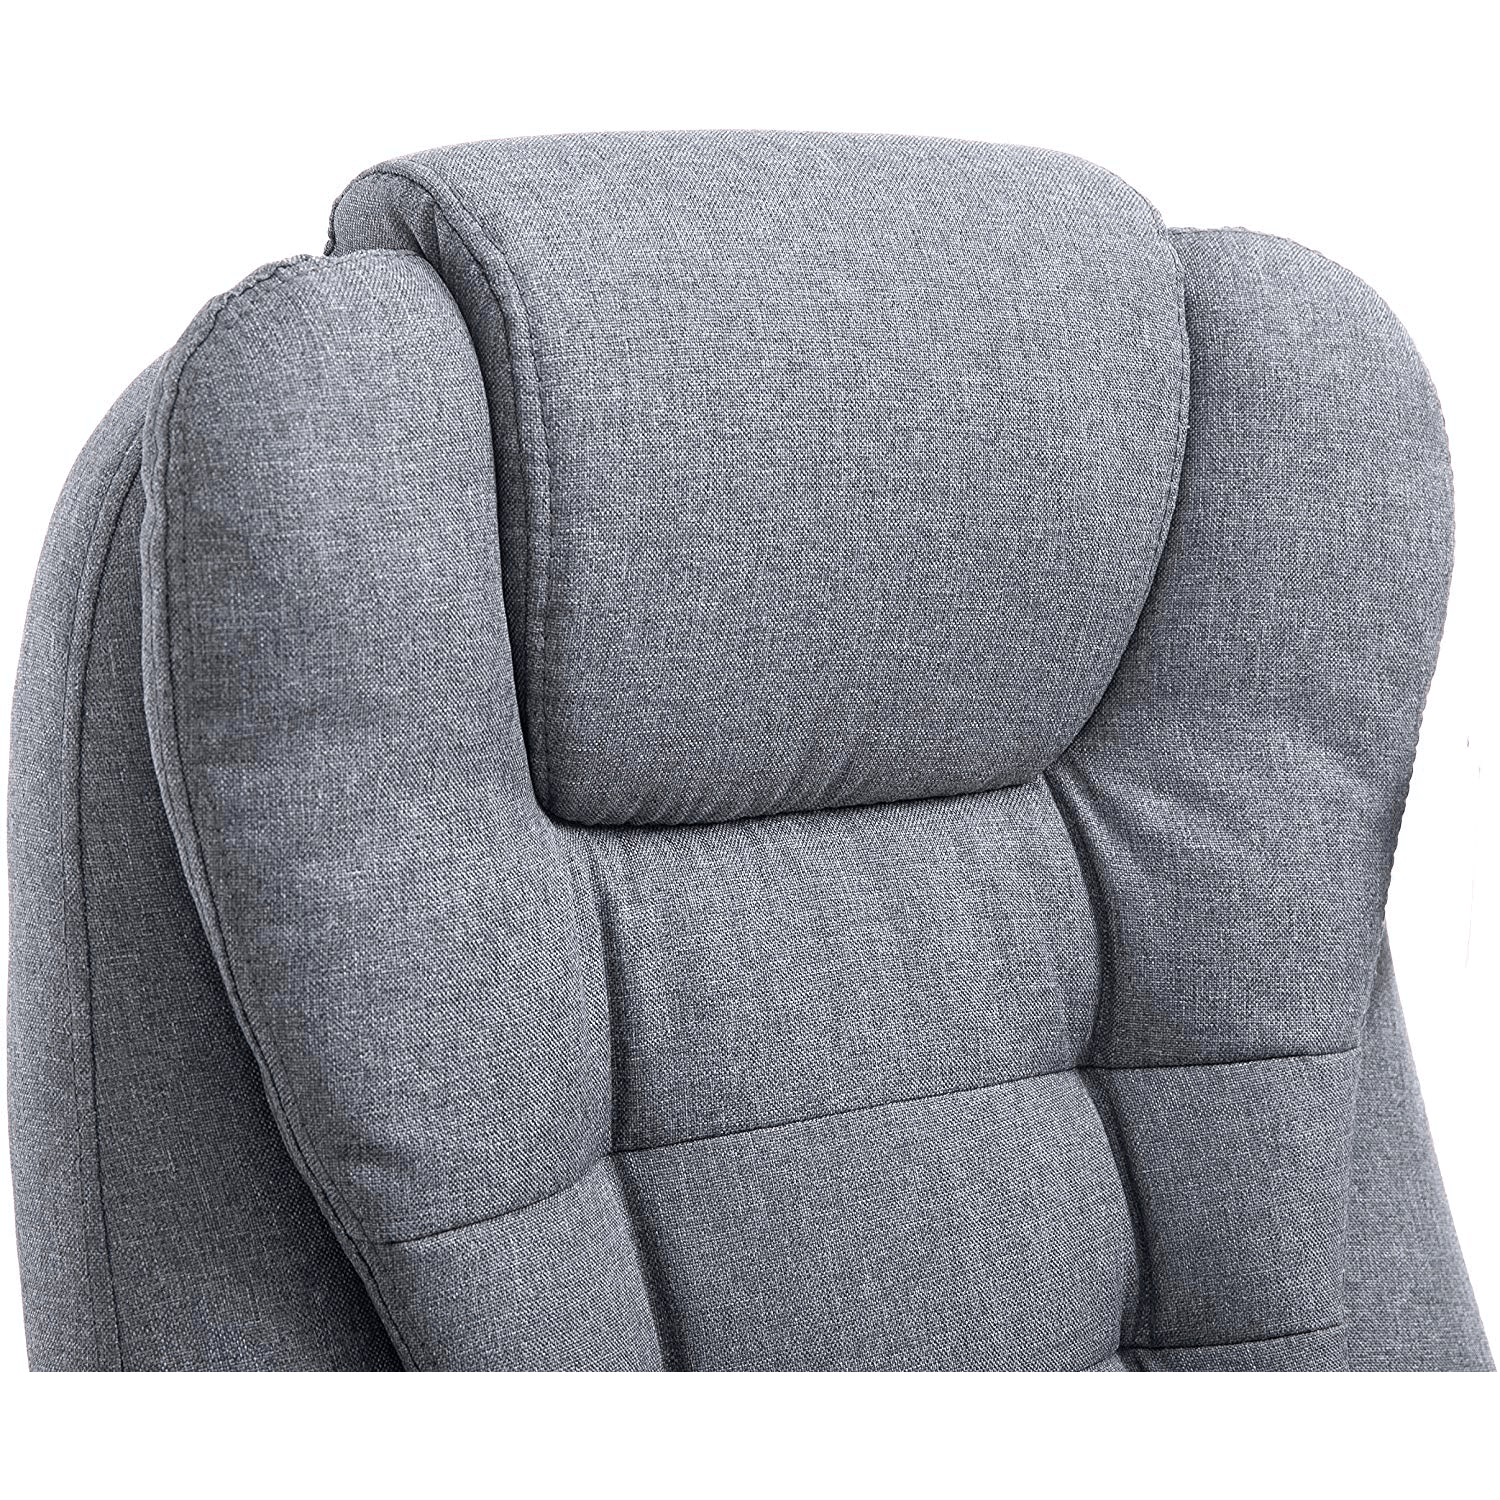 Cherry Tree Furniture Executive Recline Extra Padded Office Chair Standard, MO17 Grey Fabric